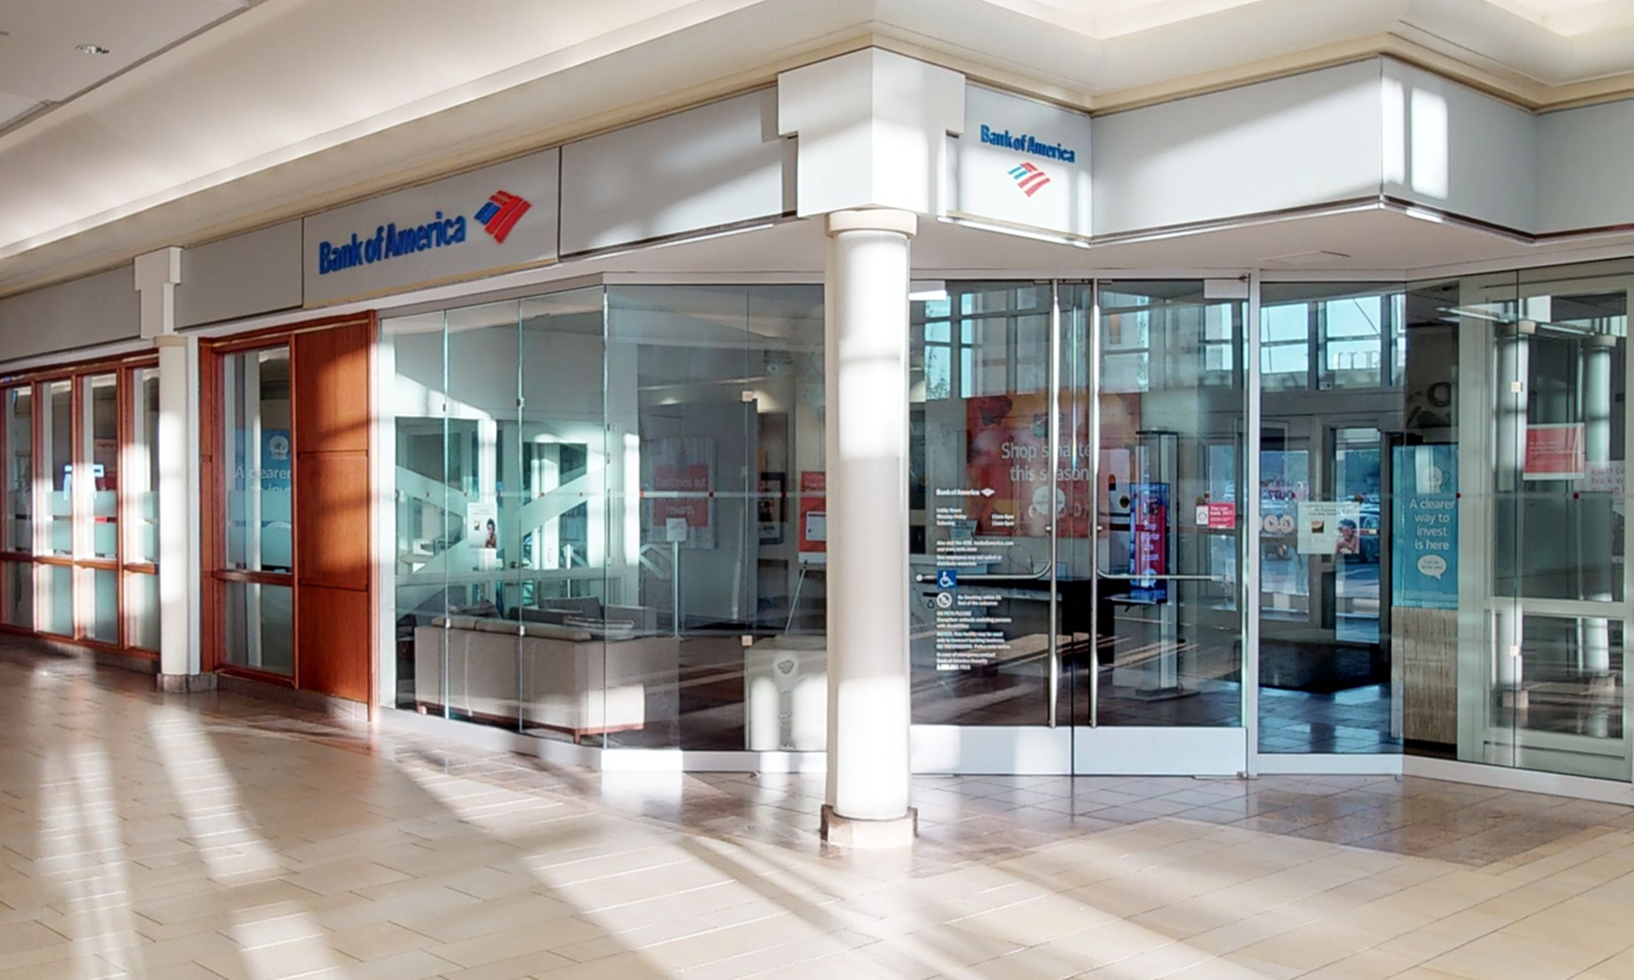 Bank of America financial center with walk-up ATM | 75 Middlesex Tpke, Burlington, MA 01803